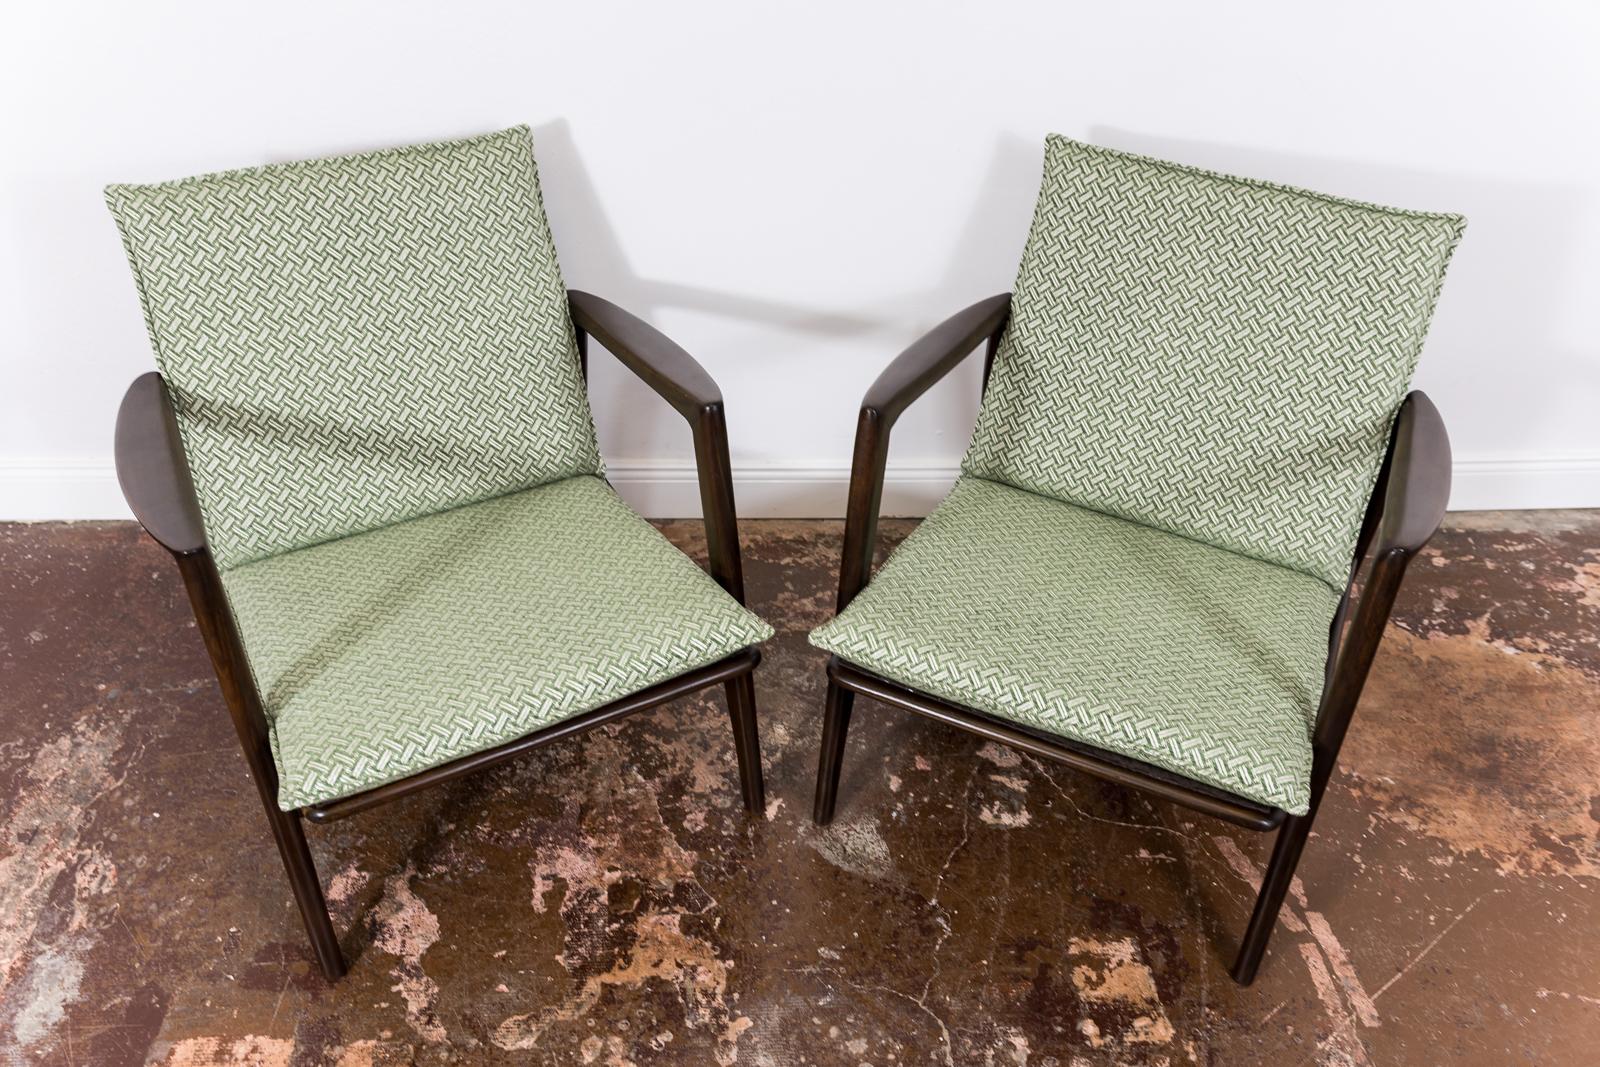 Pair of Mid Century Modern Armchairs Type 300-130, 1960s, Poland For Sale 7